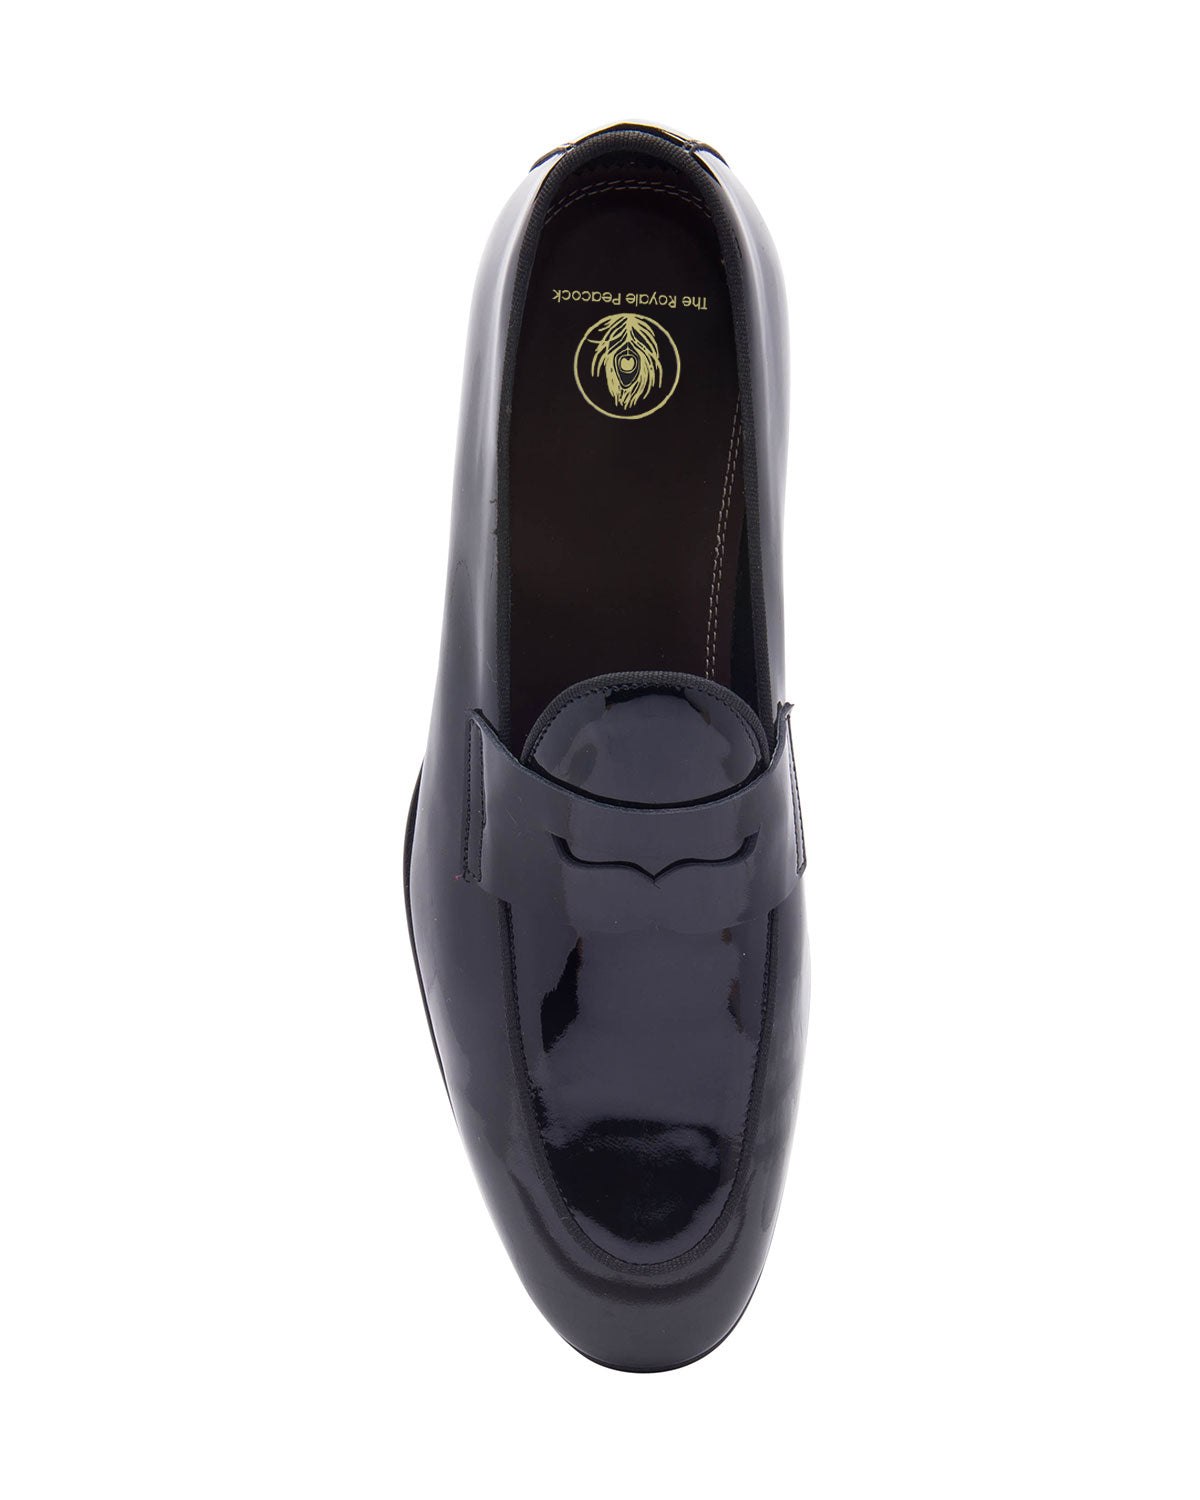 black patent penny loafers